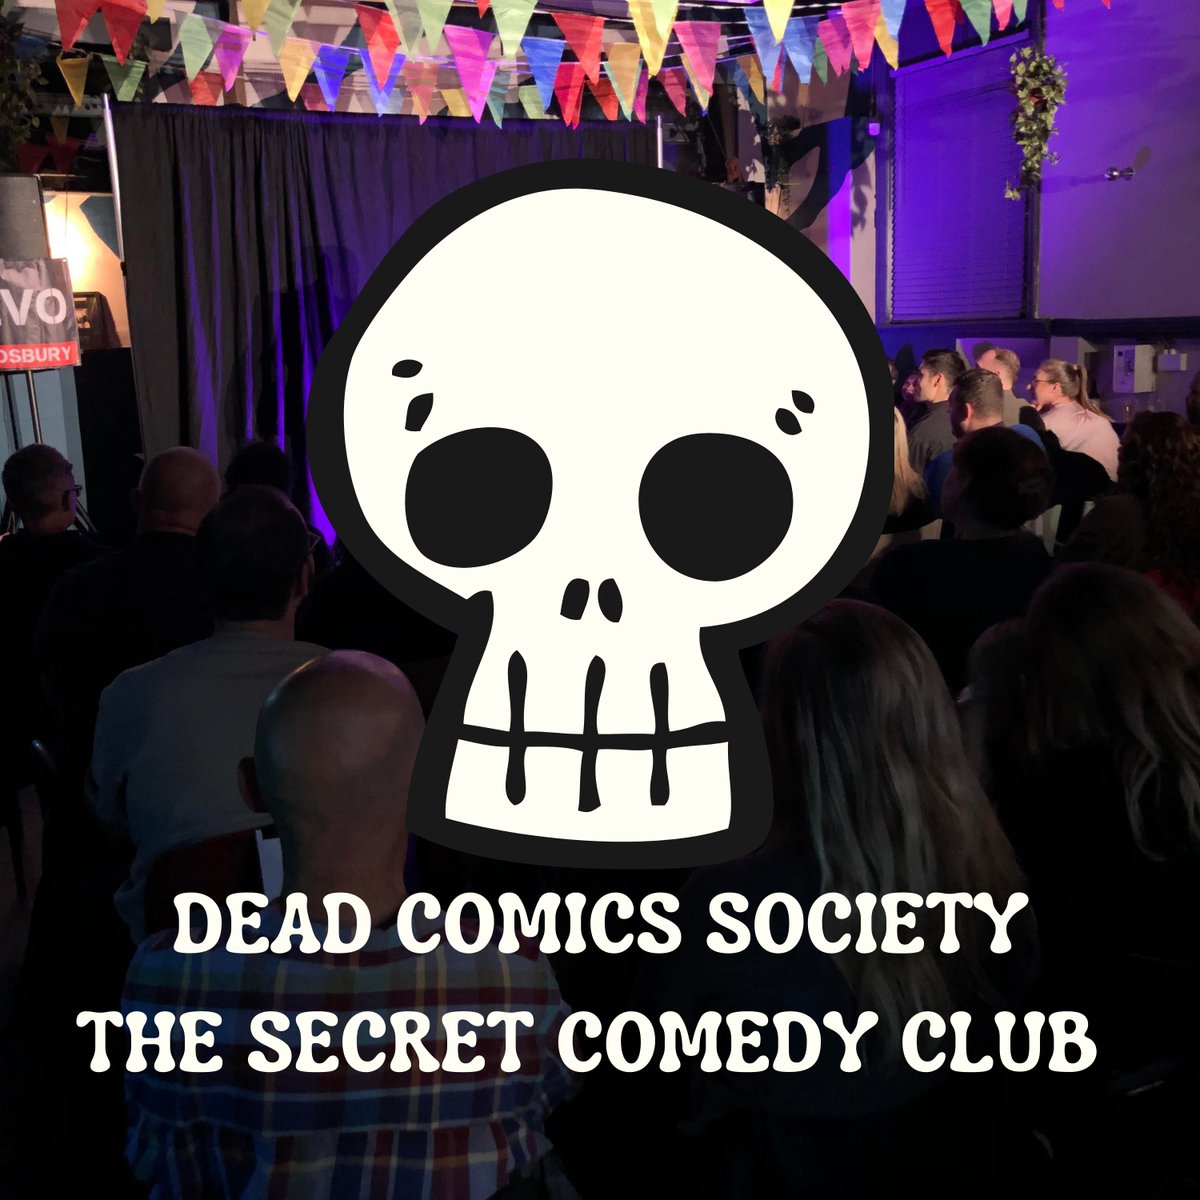 🚨THIS SUNDAY!🚨

☠️DEAD COMICS SOCIETY☠️ at @withypublichall 

TV comedians, award winners and rising stars!

JOIN THE SOCIETY! 

TICKETS £6: jokepit.com/e/5739

#withington #fallowfield #comedy #standup #didsbury #westdidsbury #chorlton